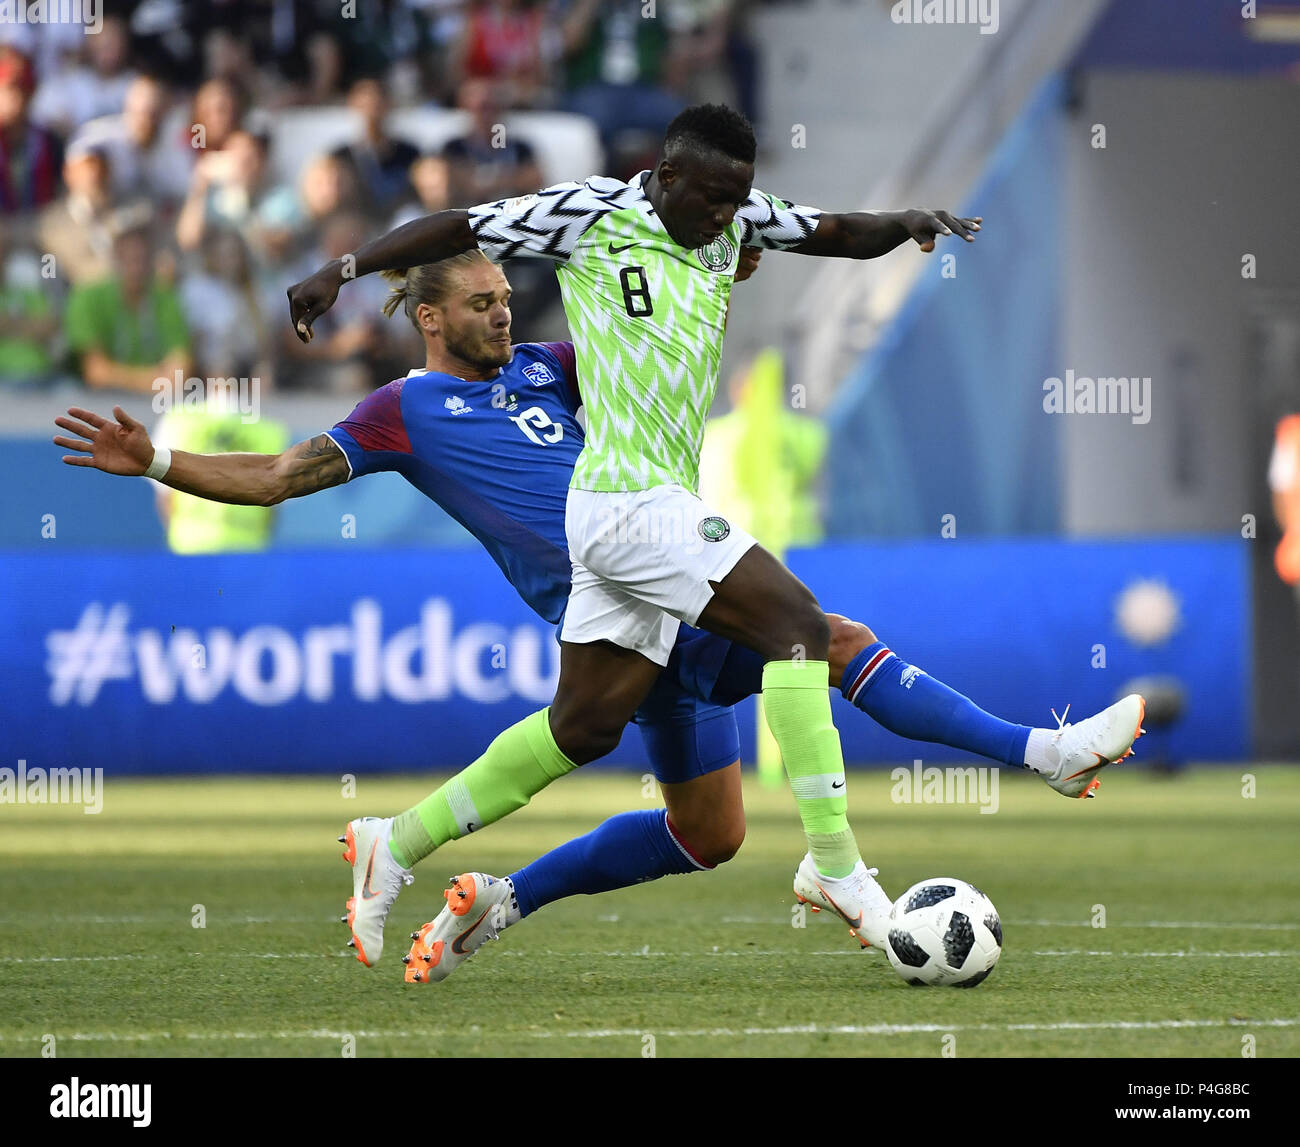 Volgograd, Russia. 22nd June, 2018. Oghenekaro Etebo (R) of Nigeria vies with Rurik Gislason of Iceland during the 2018 FIFA World Cup Group D match between Nigeria and Iceland in Volgograd, Russia, June 22, 2018. Credit: He Canling/Xinhua/Alamy Live News Stock Photo